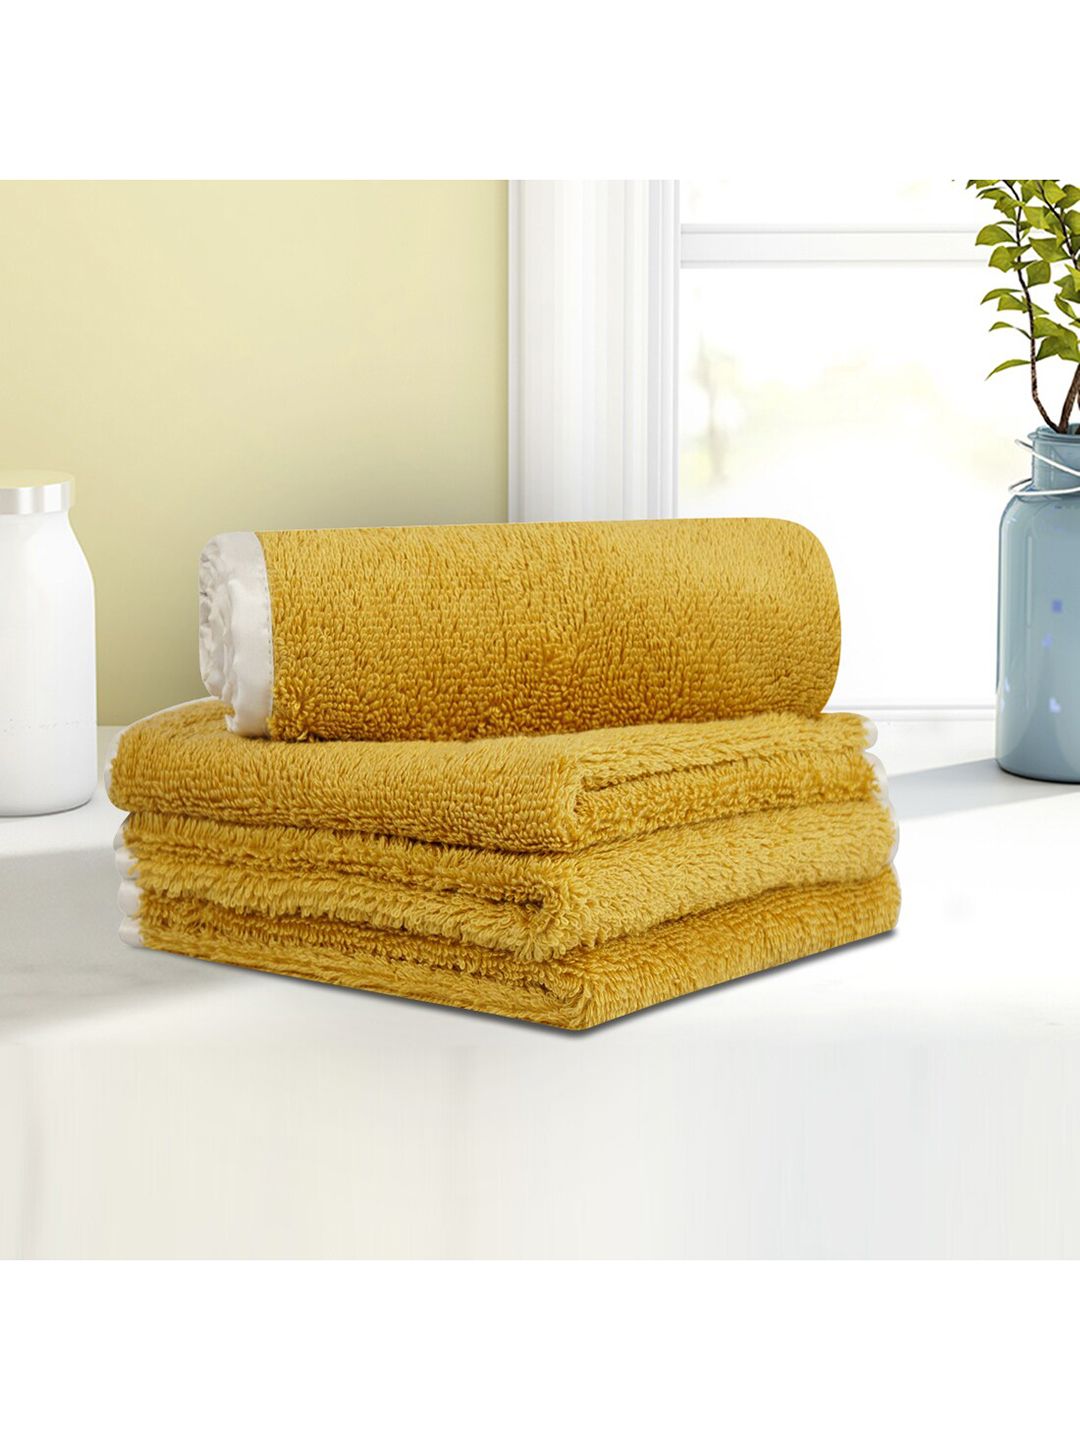 LUSH & BEYOND Set Of 4 Pure Cotton 500 GSM Face Towels Price in India